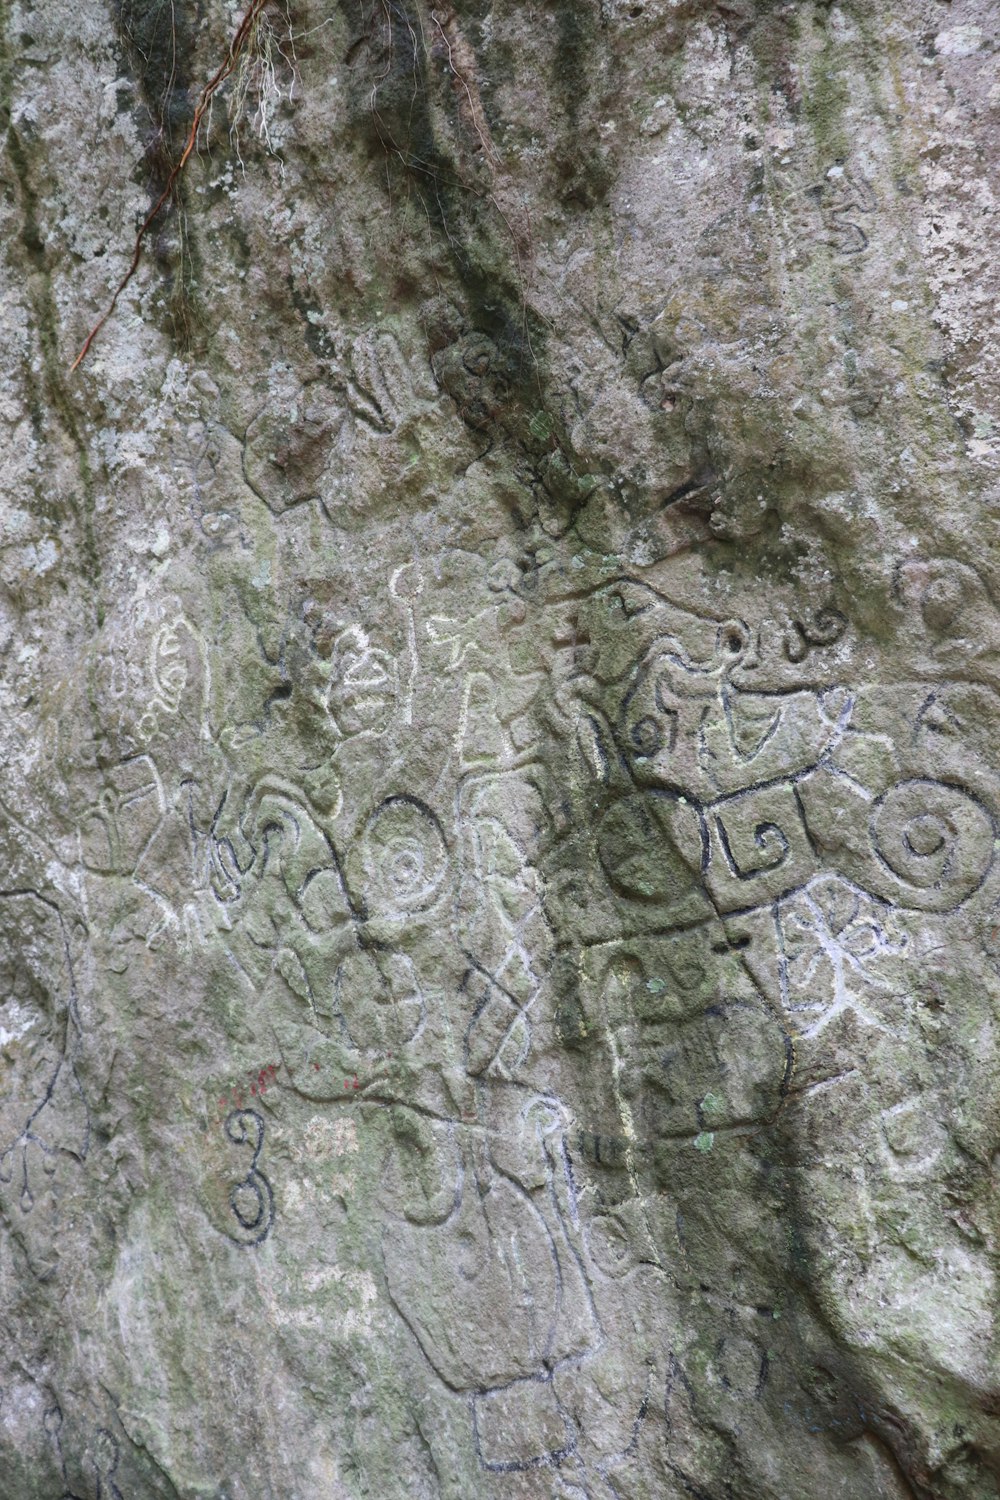 a rock with some carvings on it